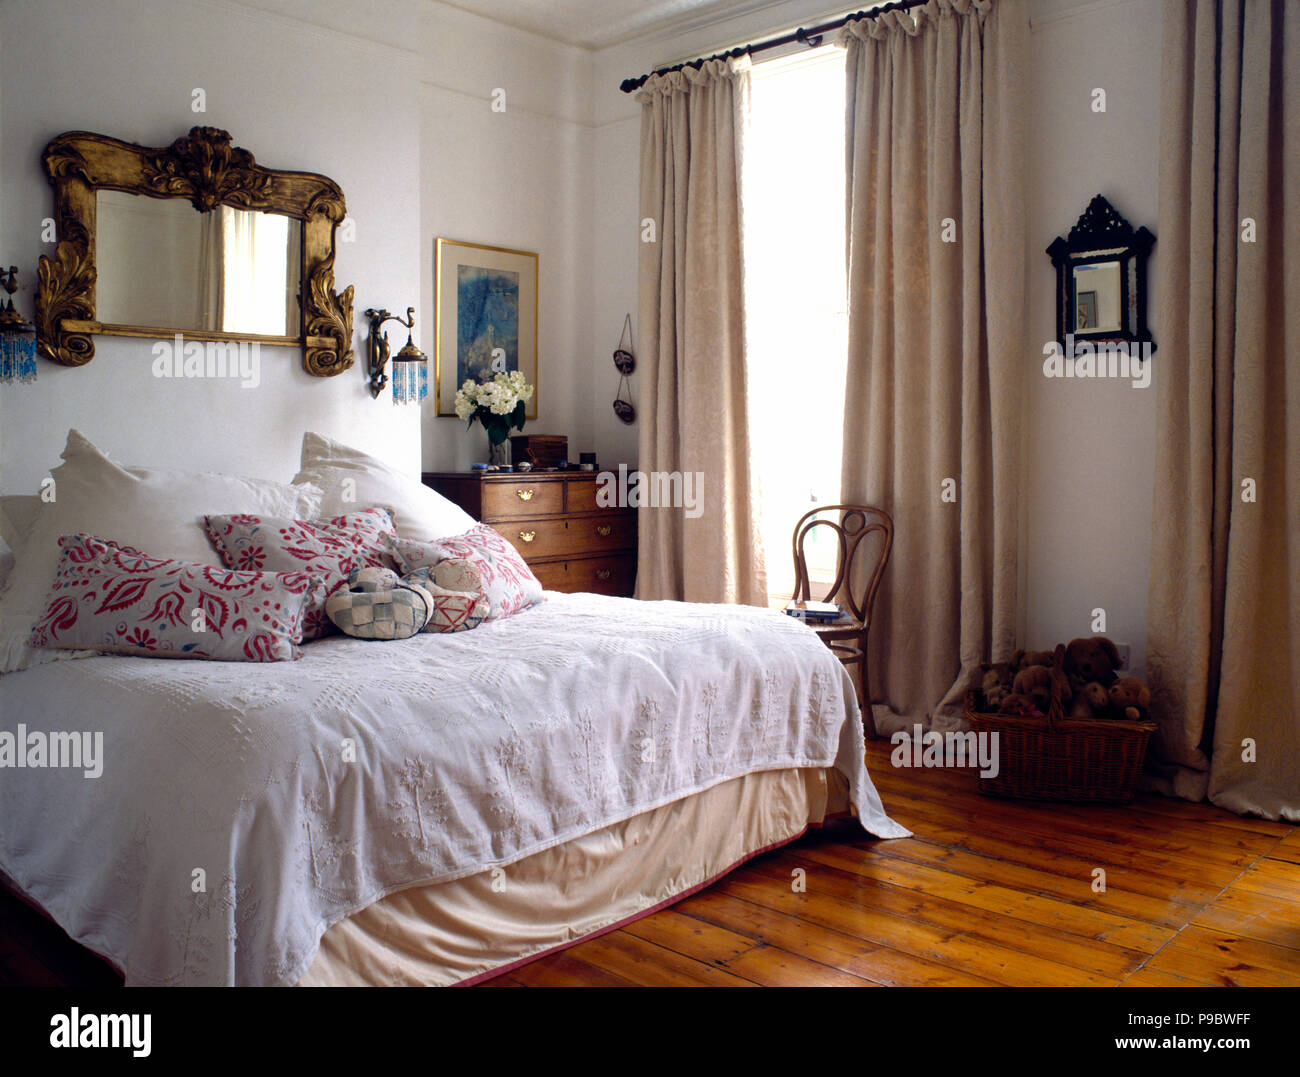 Antique mirror above bed with vintage cotton bedspread in townhouse bedroom with cream curtains and a wooden floor Stock Photo